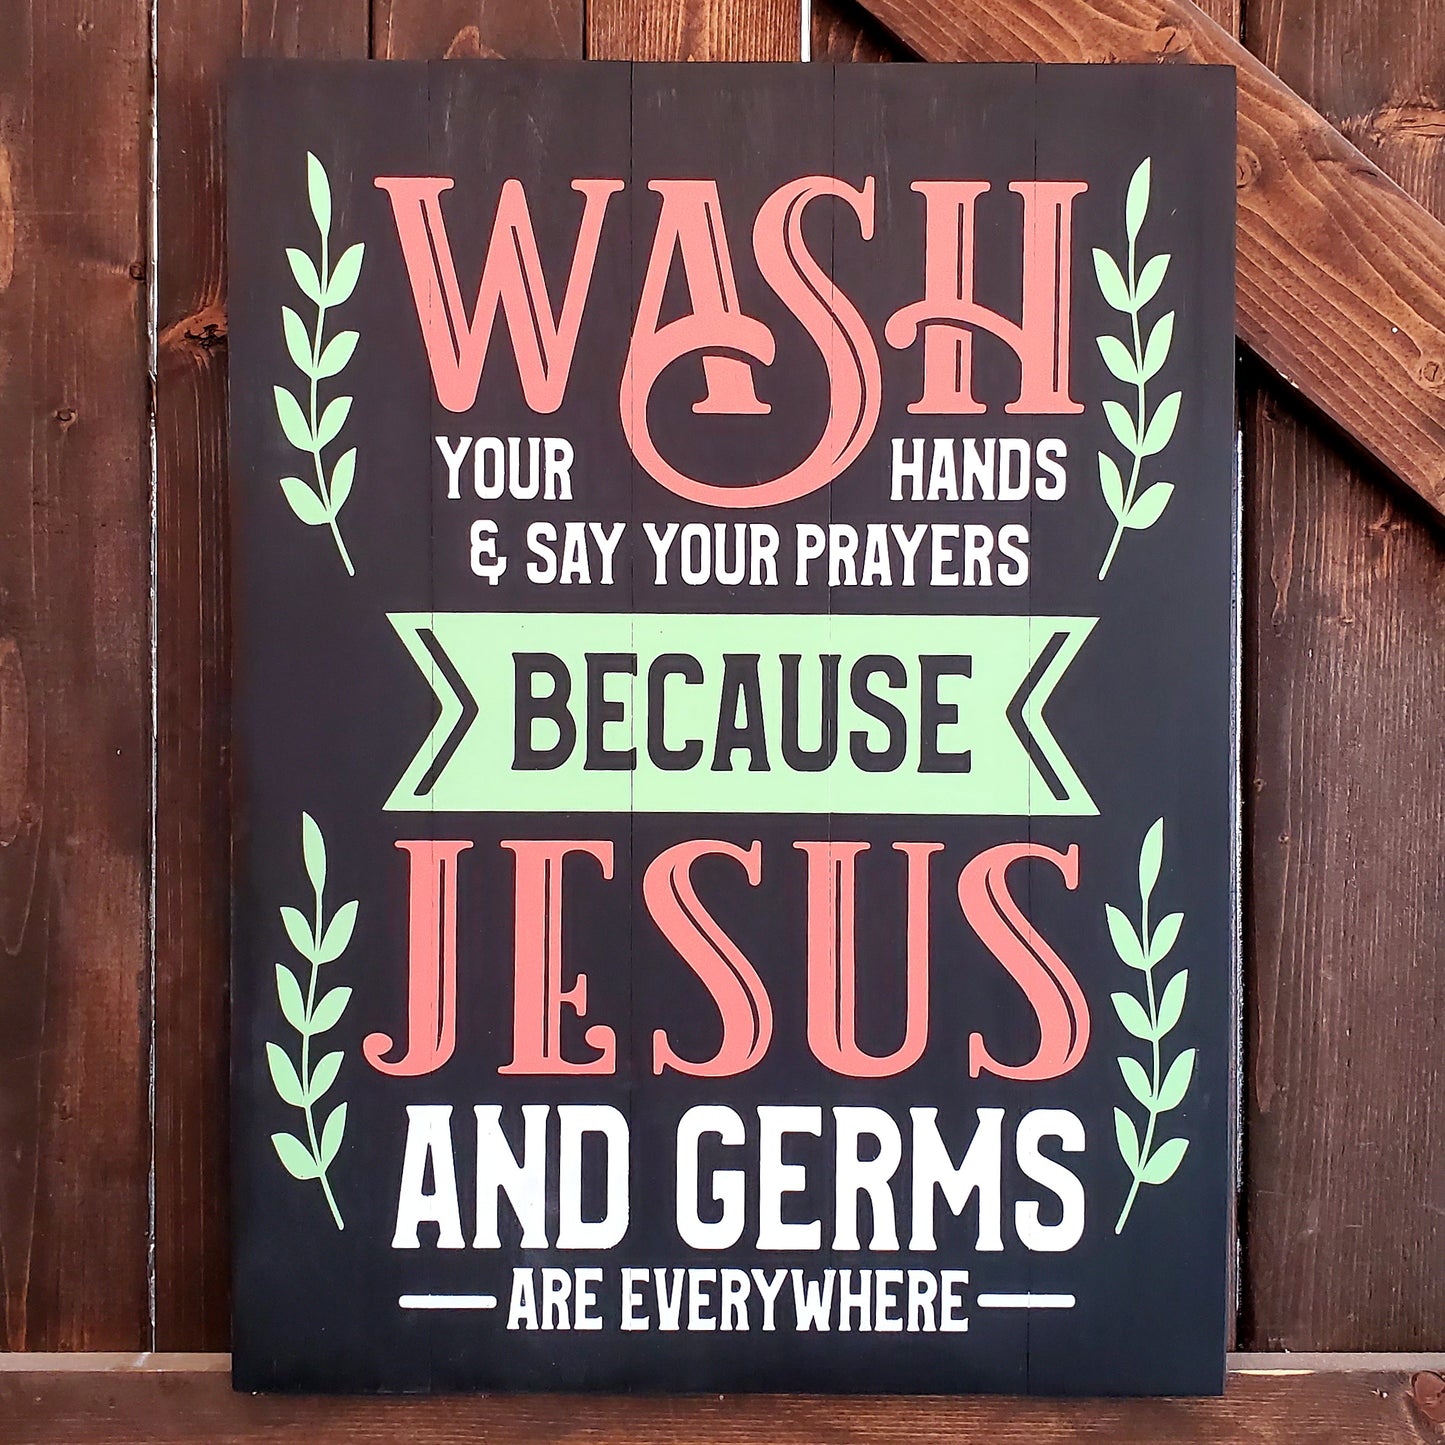 Wash Your Hands & Say Your Prayers Because Jesus and Germs Are Everywhere: SIGNATURE DESIGN - Paisley Grace Makery